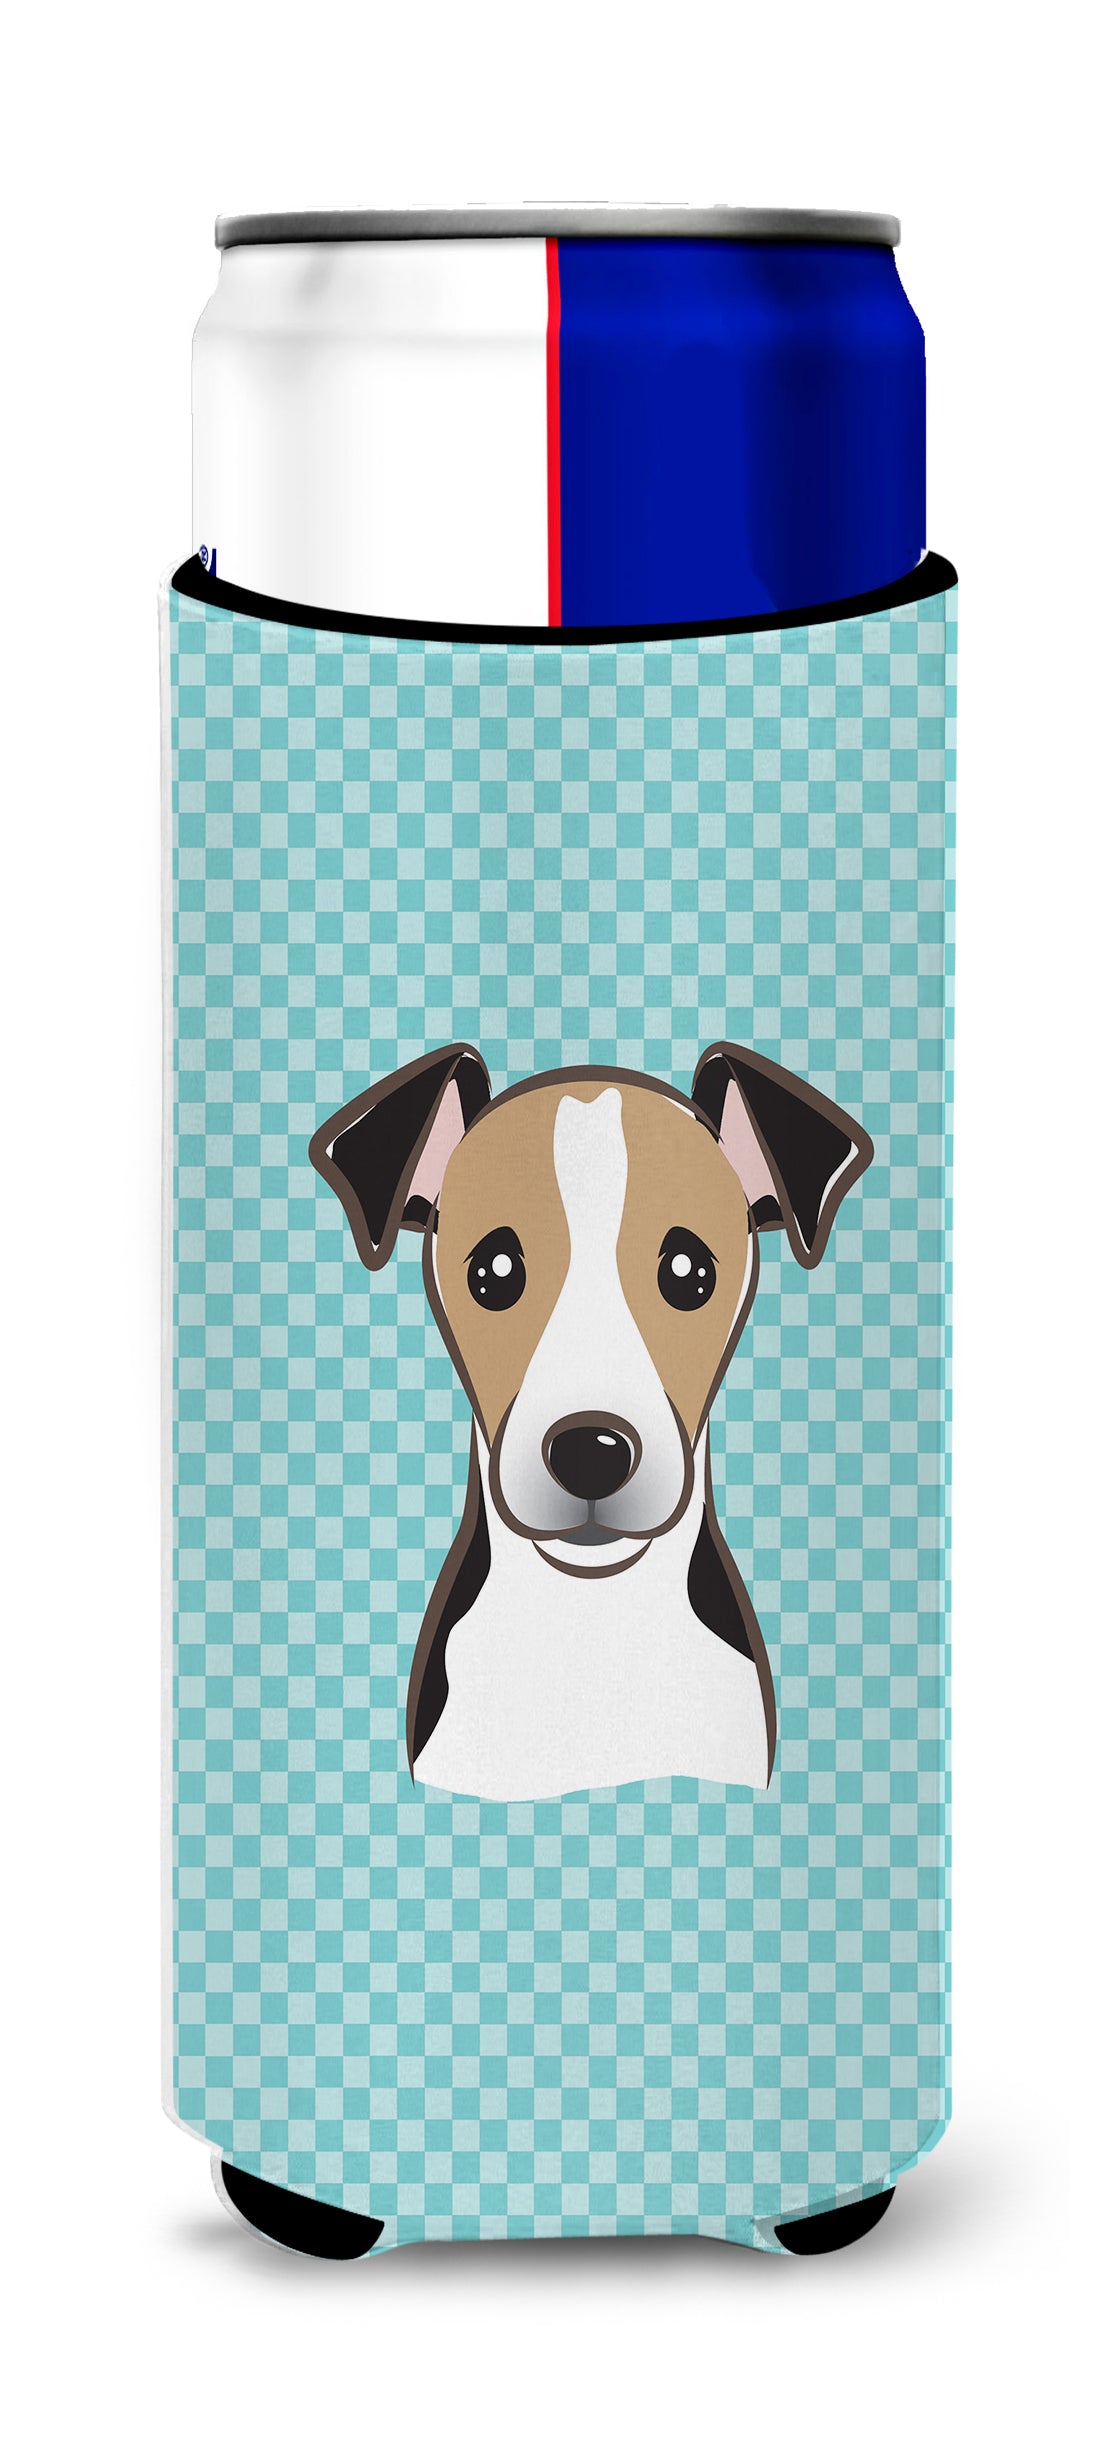 Checkerboard Blue Jack Russell Terrier Ultra Beverage Insulators for slim cans.